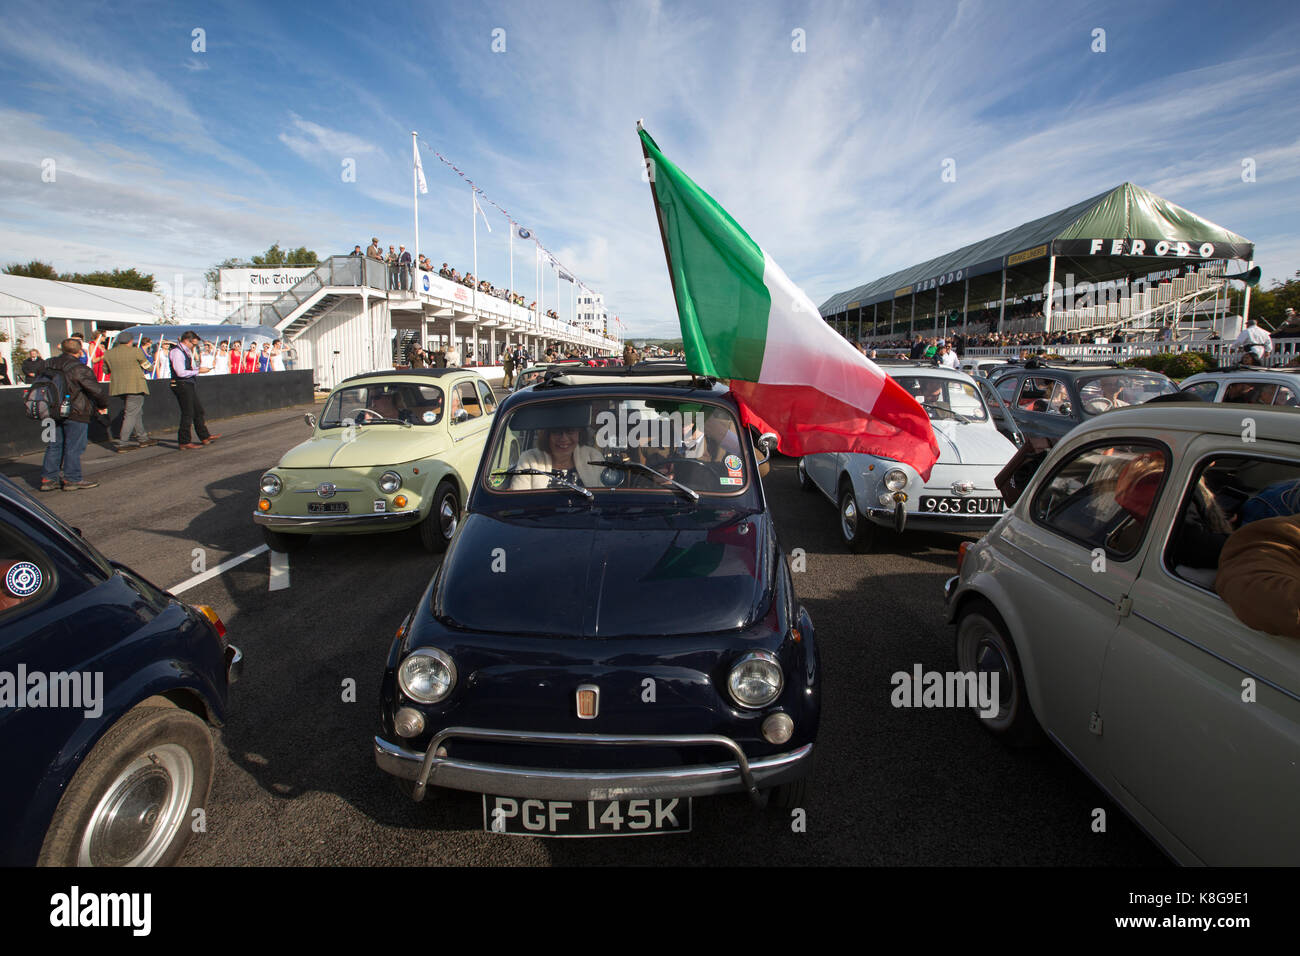 FIAT 500 Parade, Goodwood Revival 2017 Meeting, Goodwood race track, organised by the British Automobile Racing Club, Chichester, West Sussex, England Stock Photo